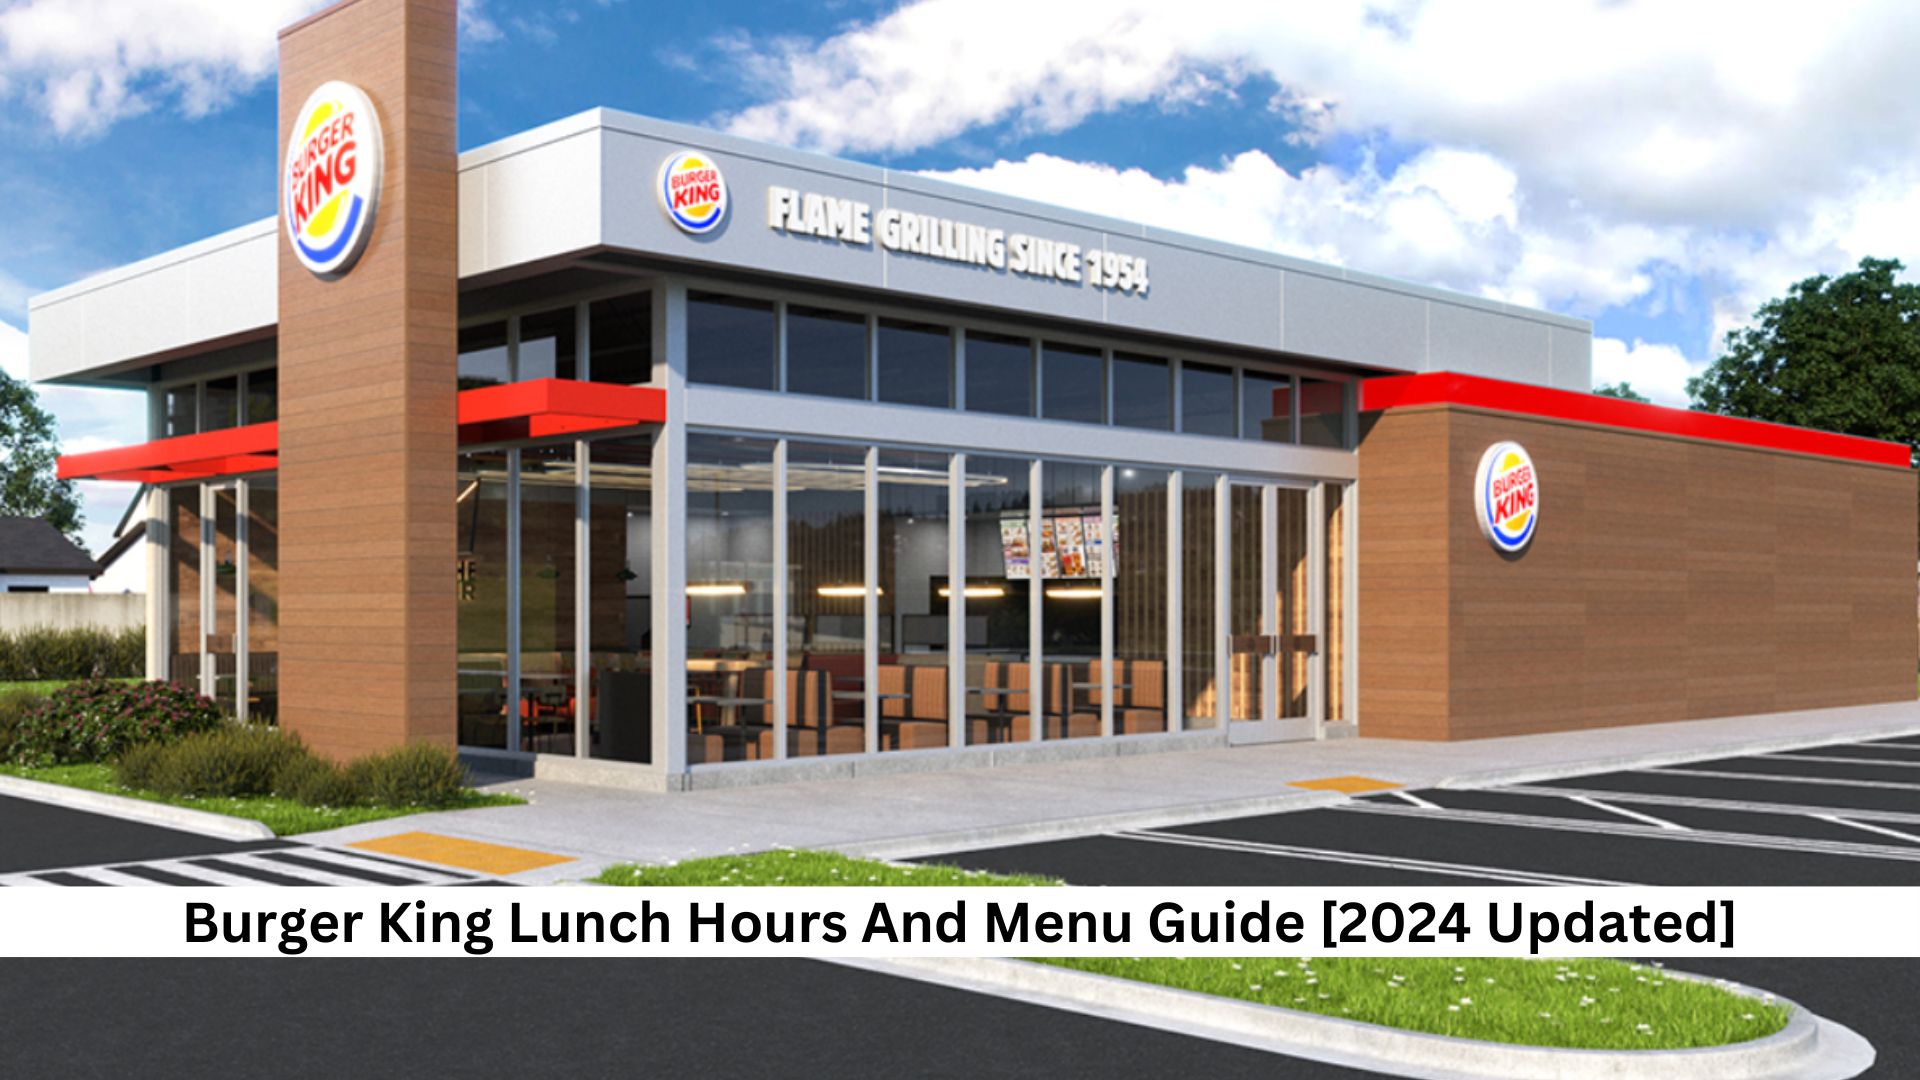 Burger King Lunch Hours And Menu Guide [2024 Updated]